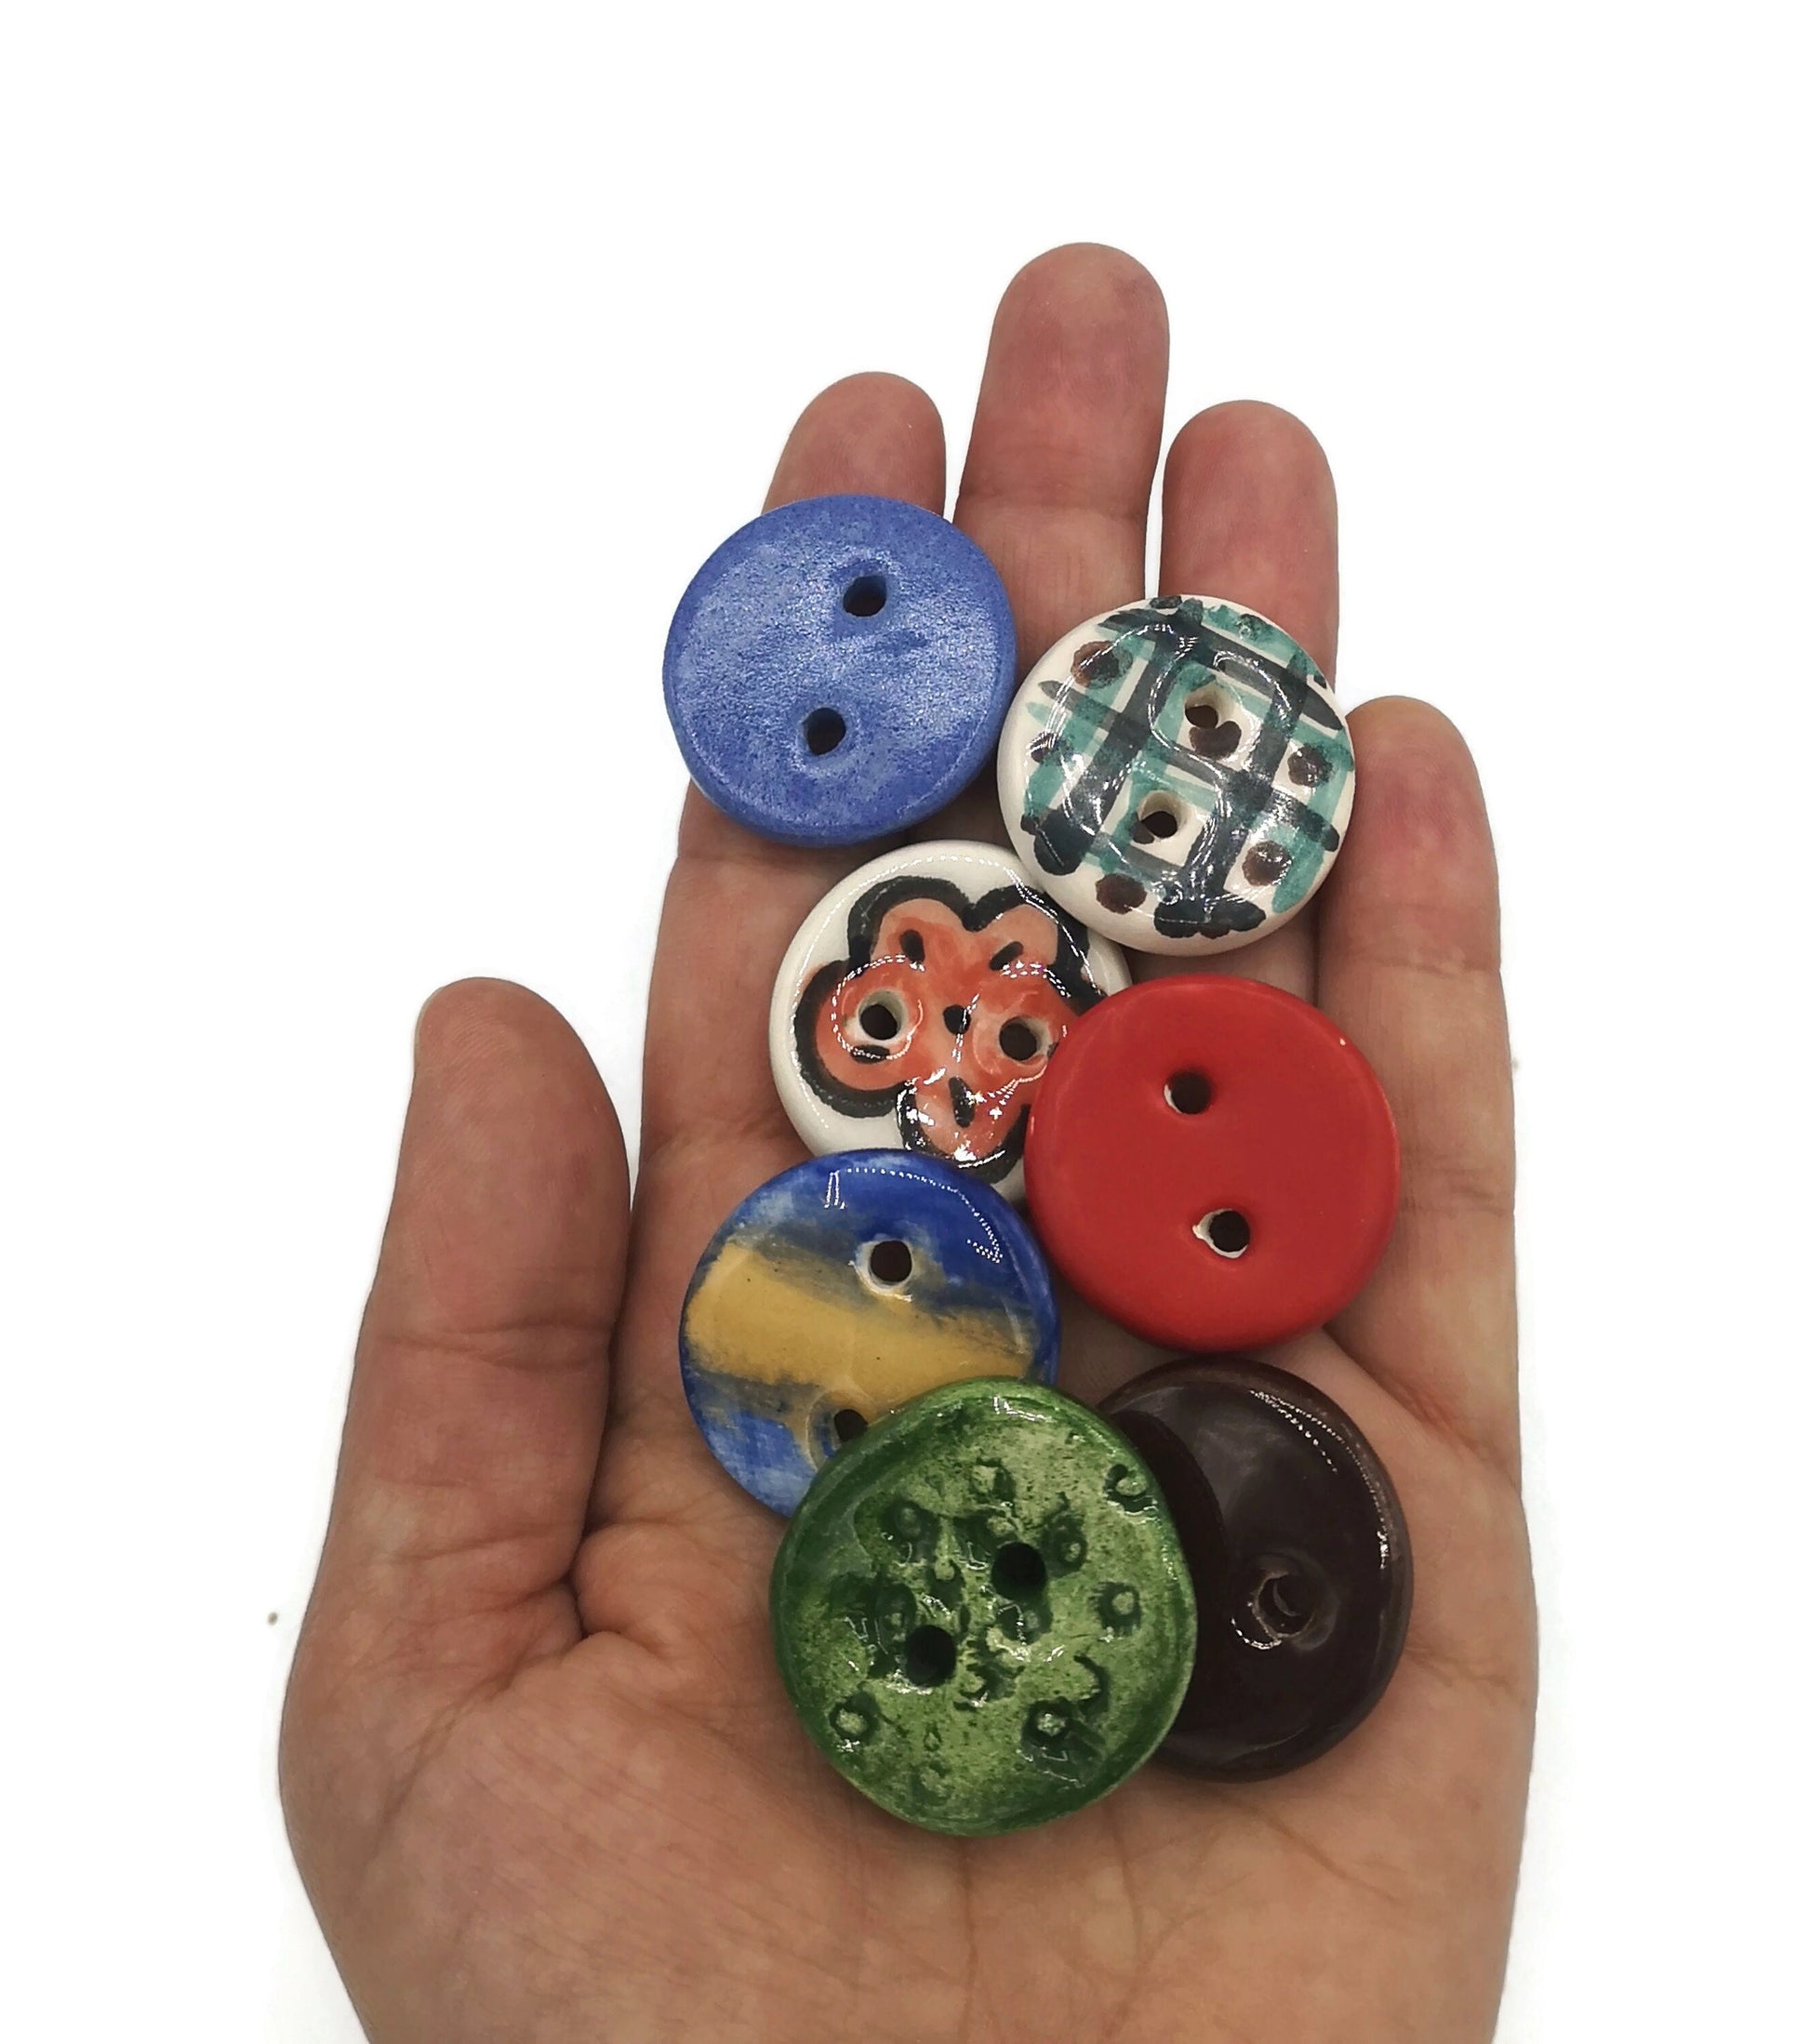 7Pc 30mm Handmade Ceramic Sewing Buttons, Cute Round Buttons, Sewing Suplies And Notions, Best Sellers Jewelry Making Buttons Vintage Look - Ceramica Ana Rafael